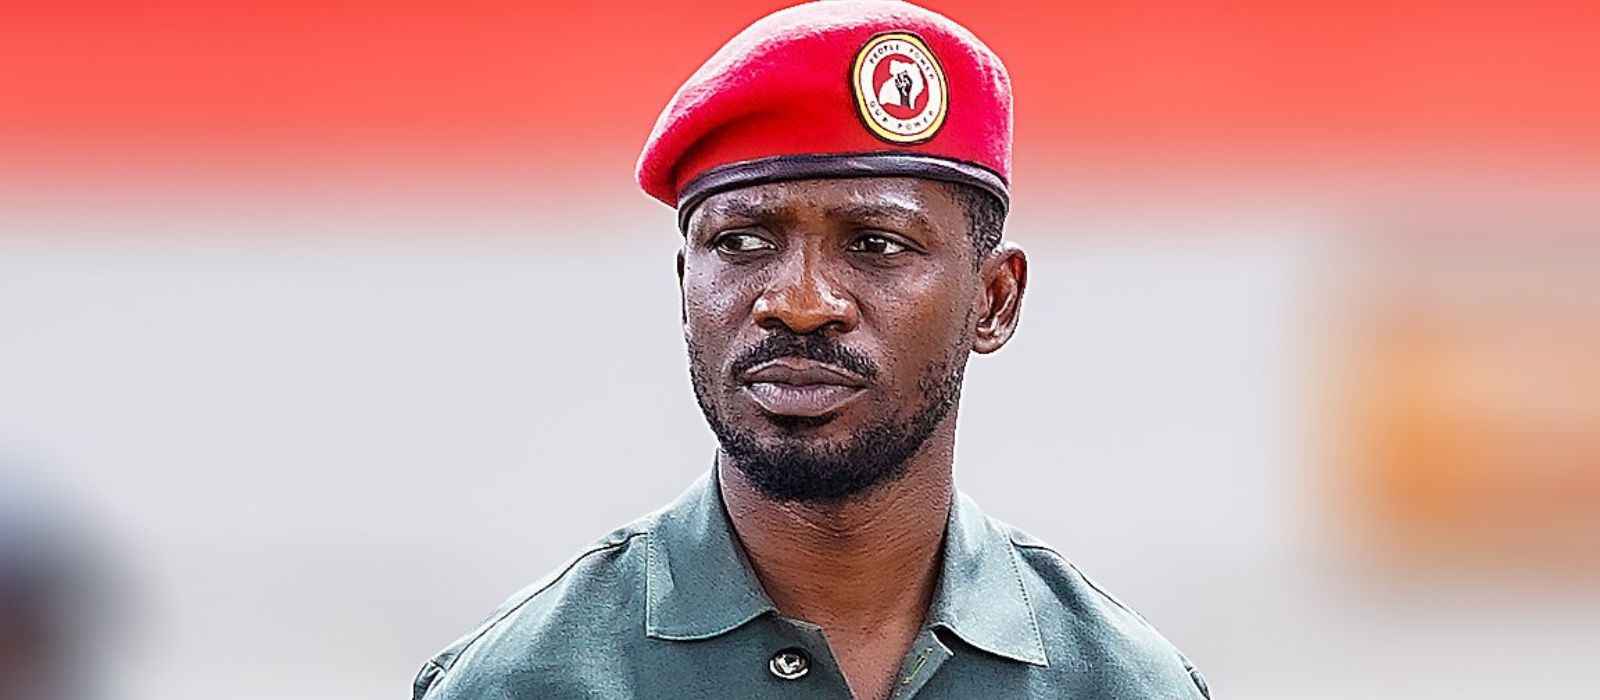 Bobi Wine: The ‘Ghetto President’ gets nominated at the Oscars